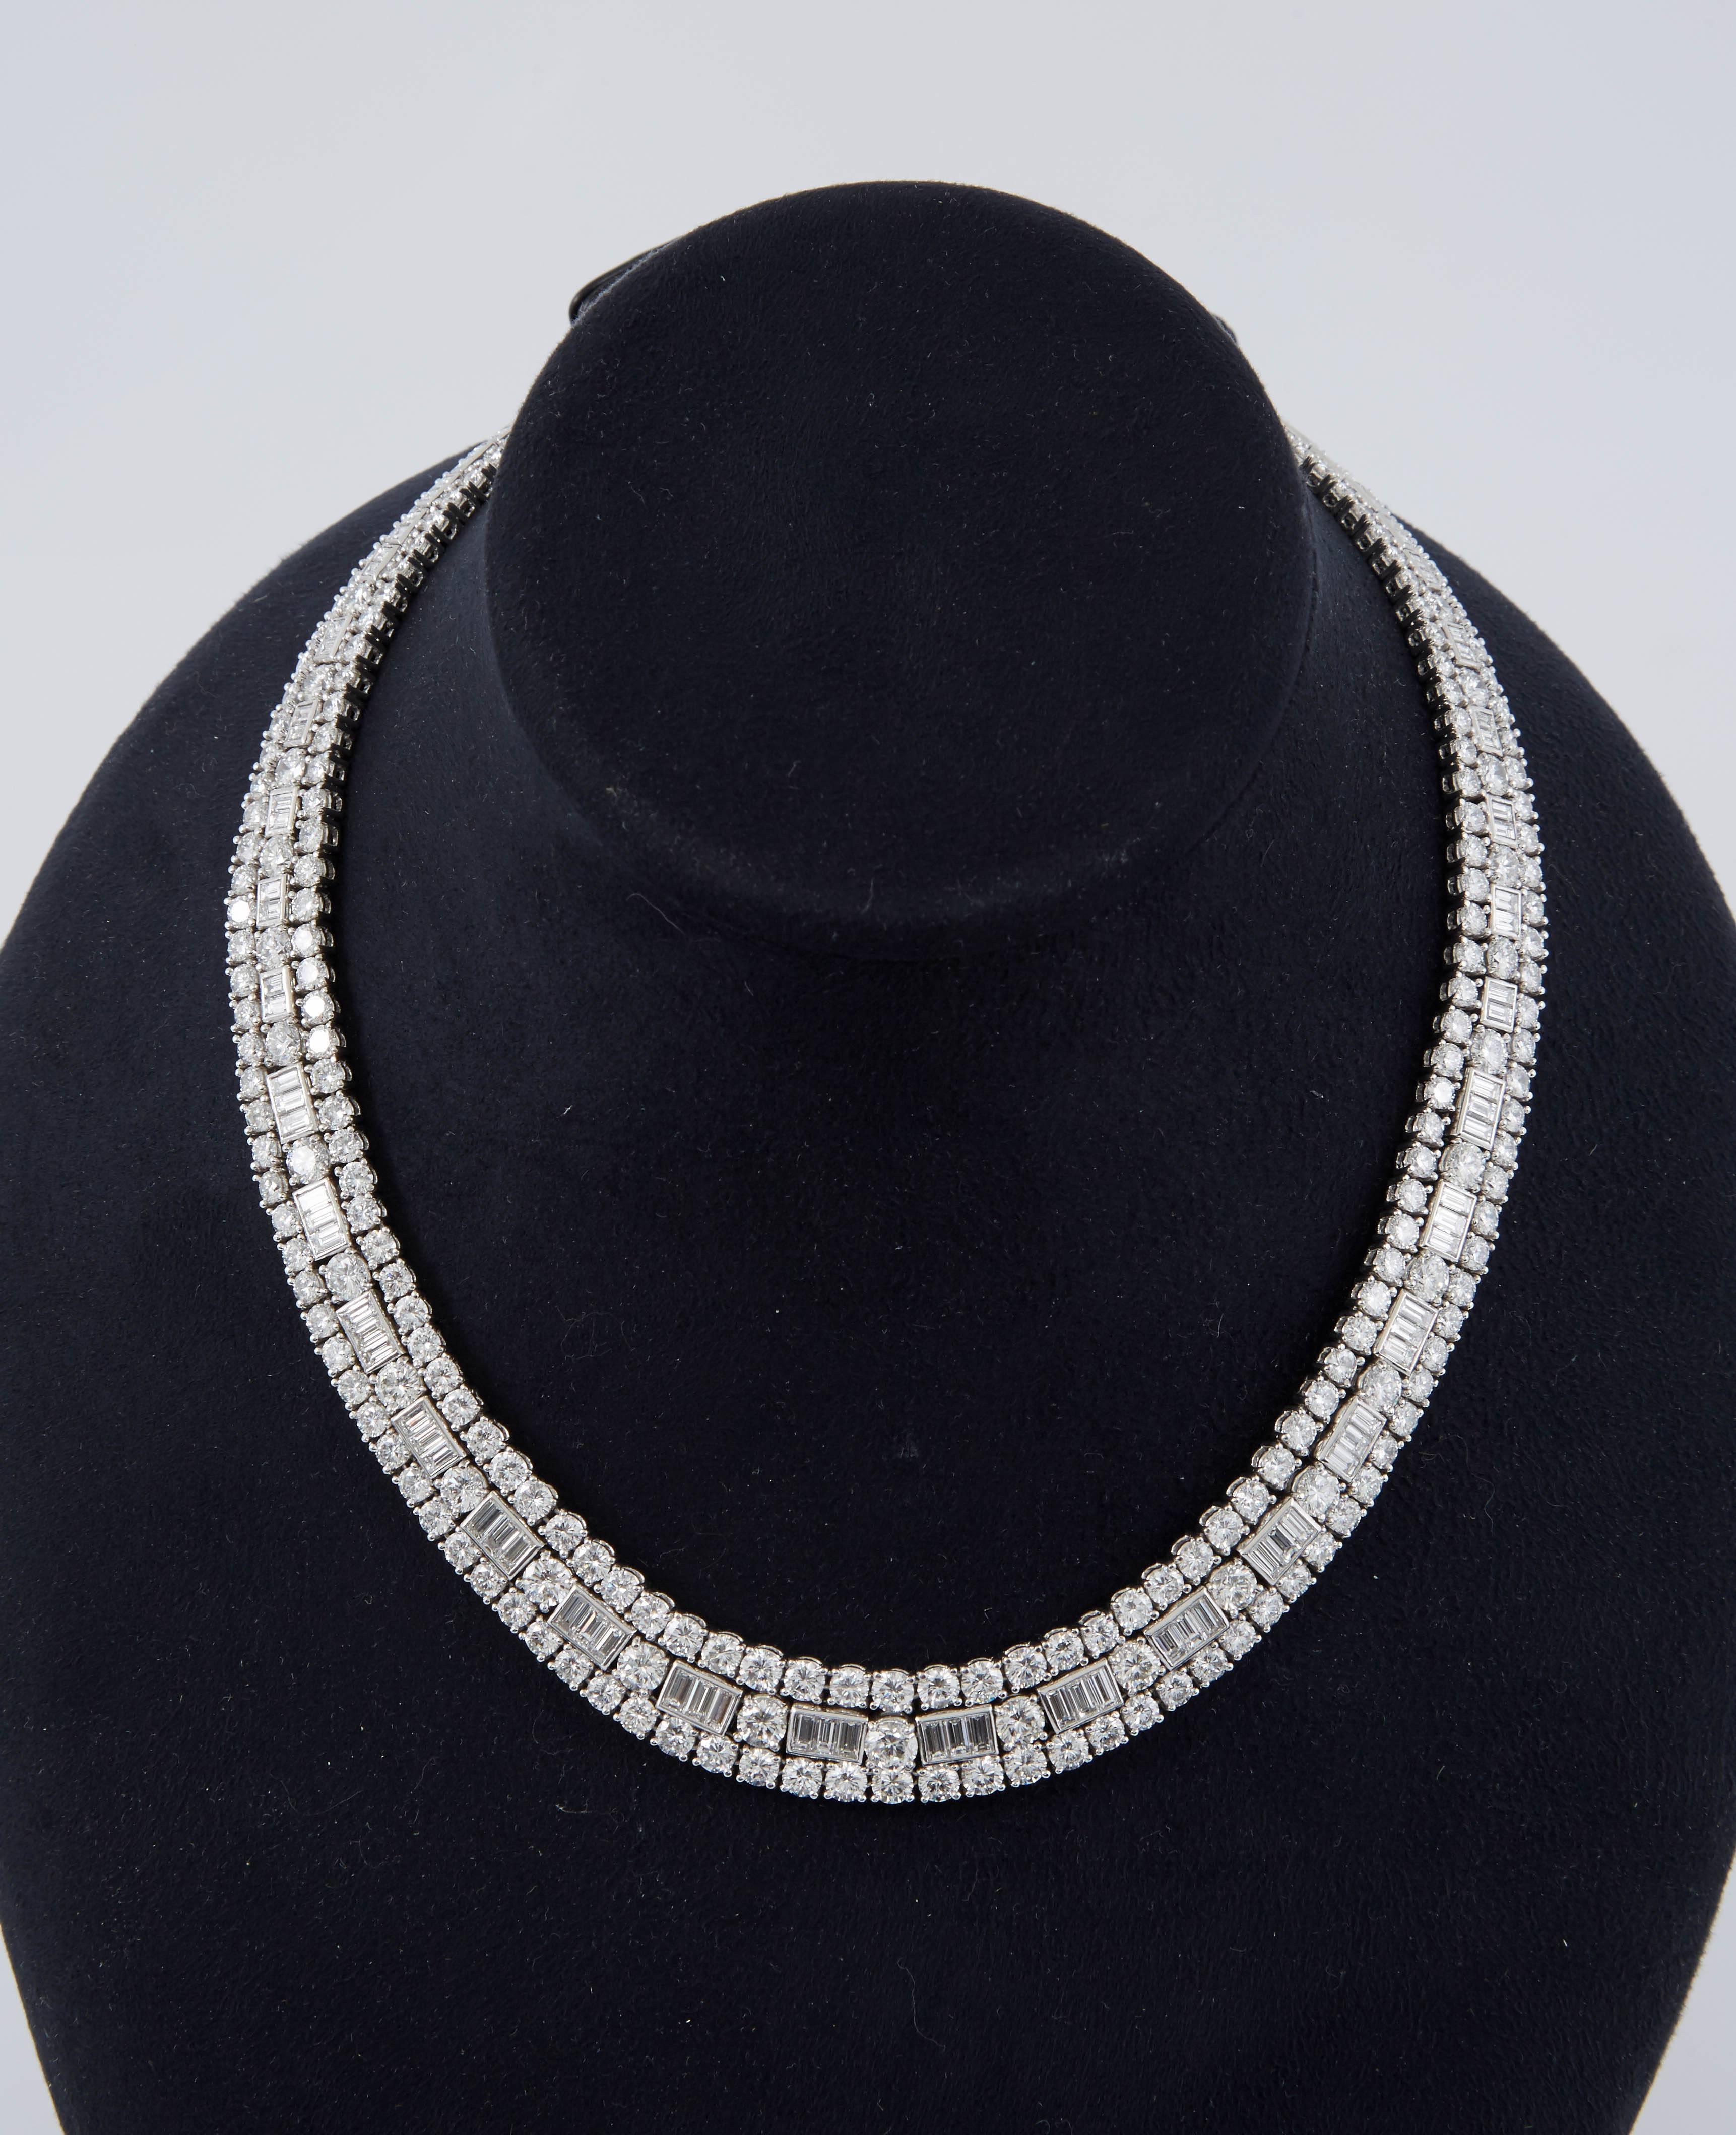 Finely crafted in platinum with round brilliant and baguette cut diamonds weighing approximately a total of 48.00 carats.
Signed and certified by David Webb.